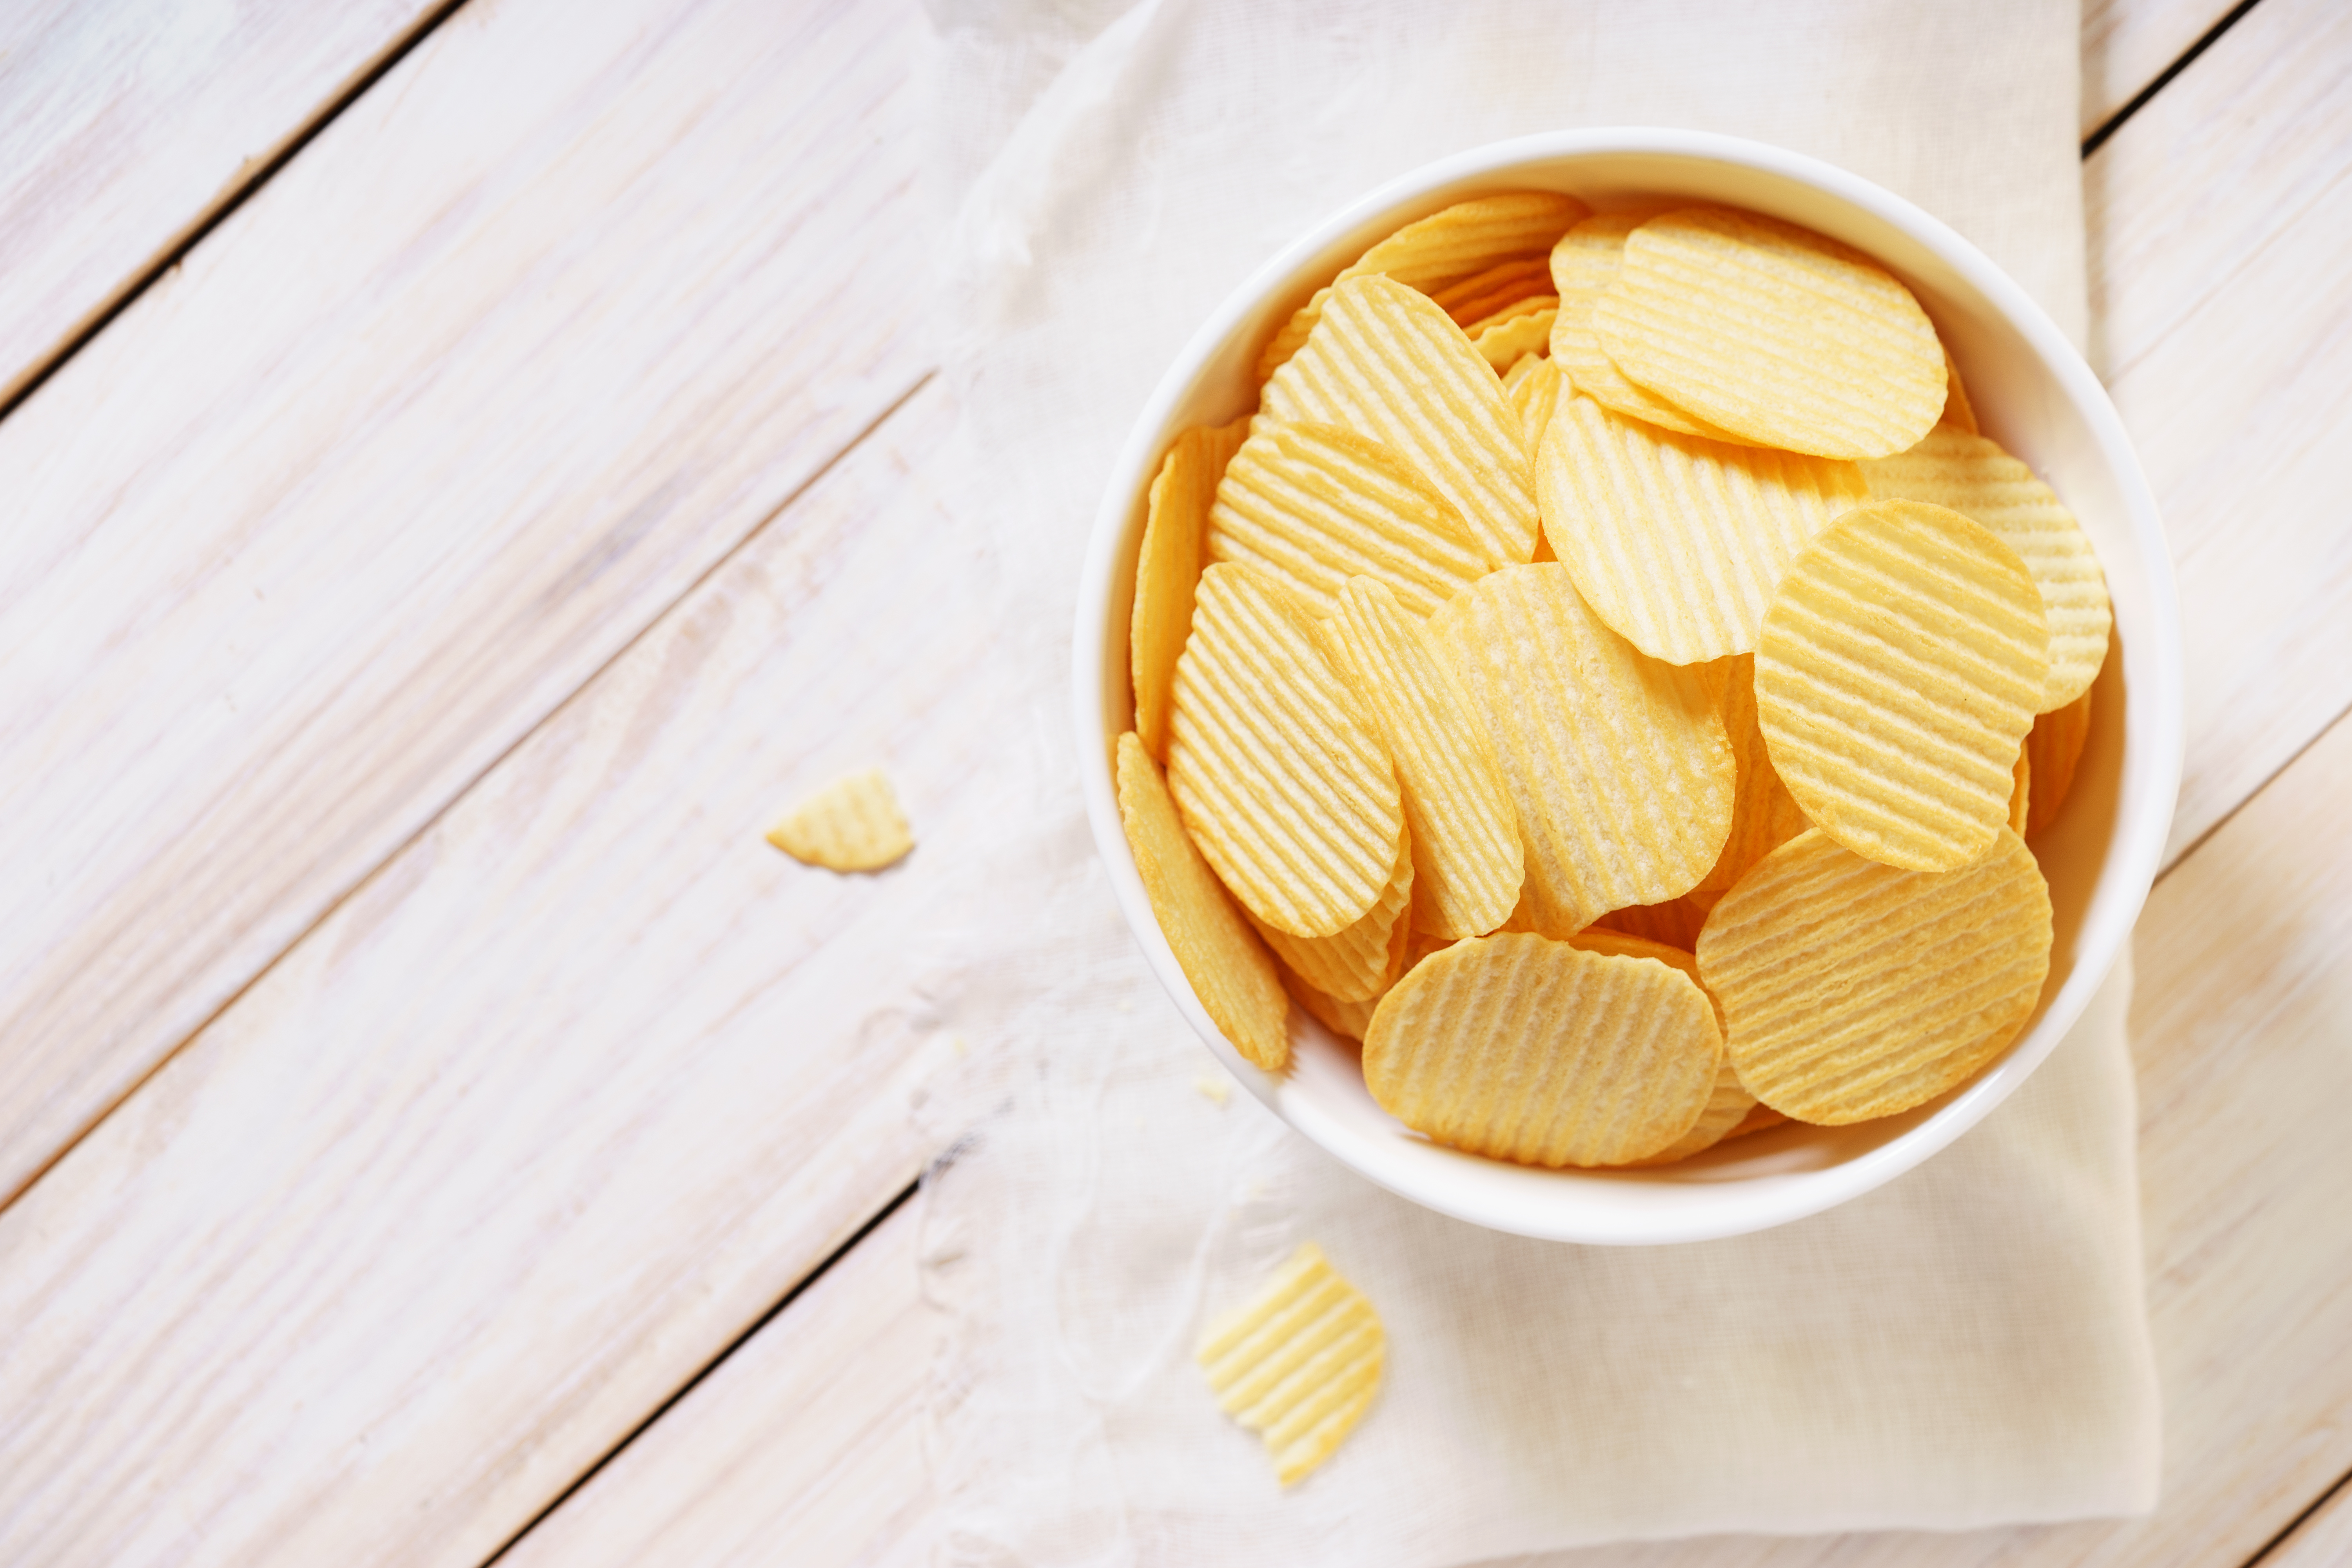 The Rise of America's Most Beloved Potato Chip